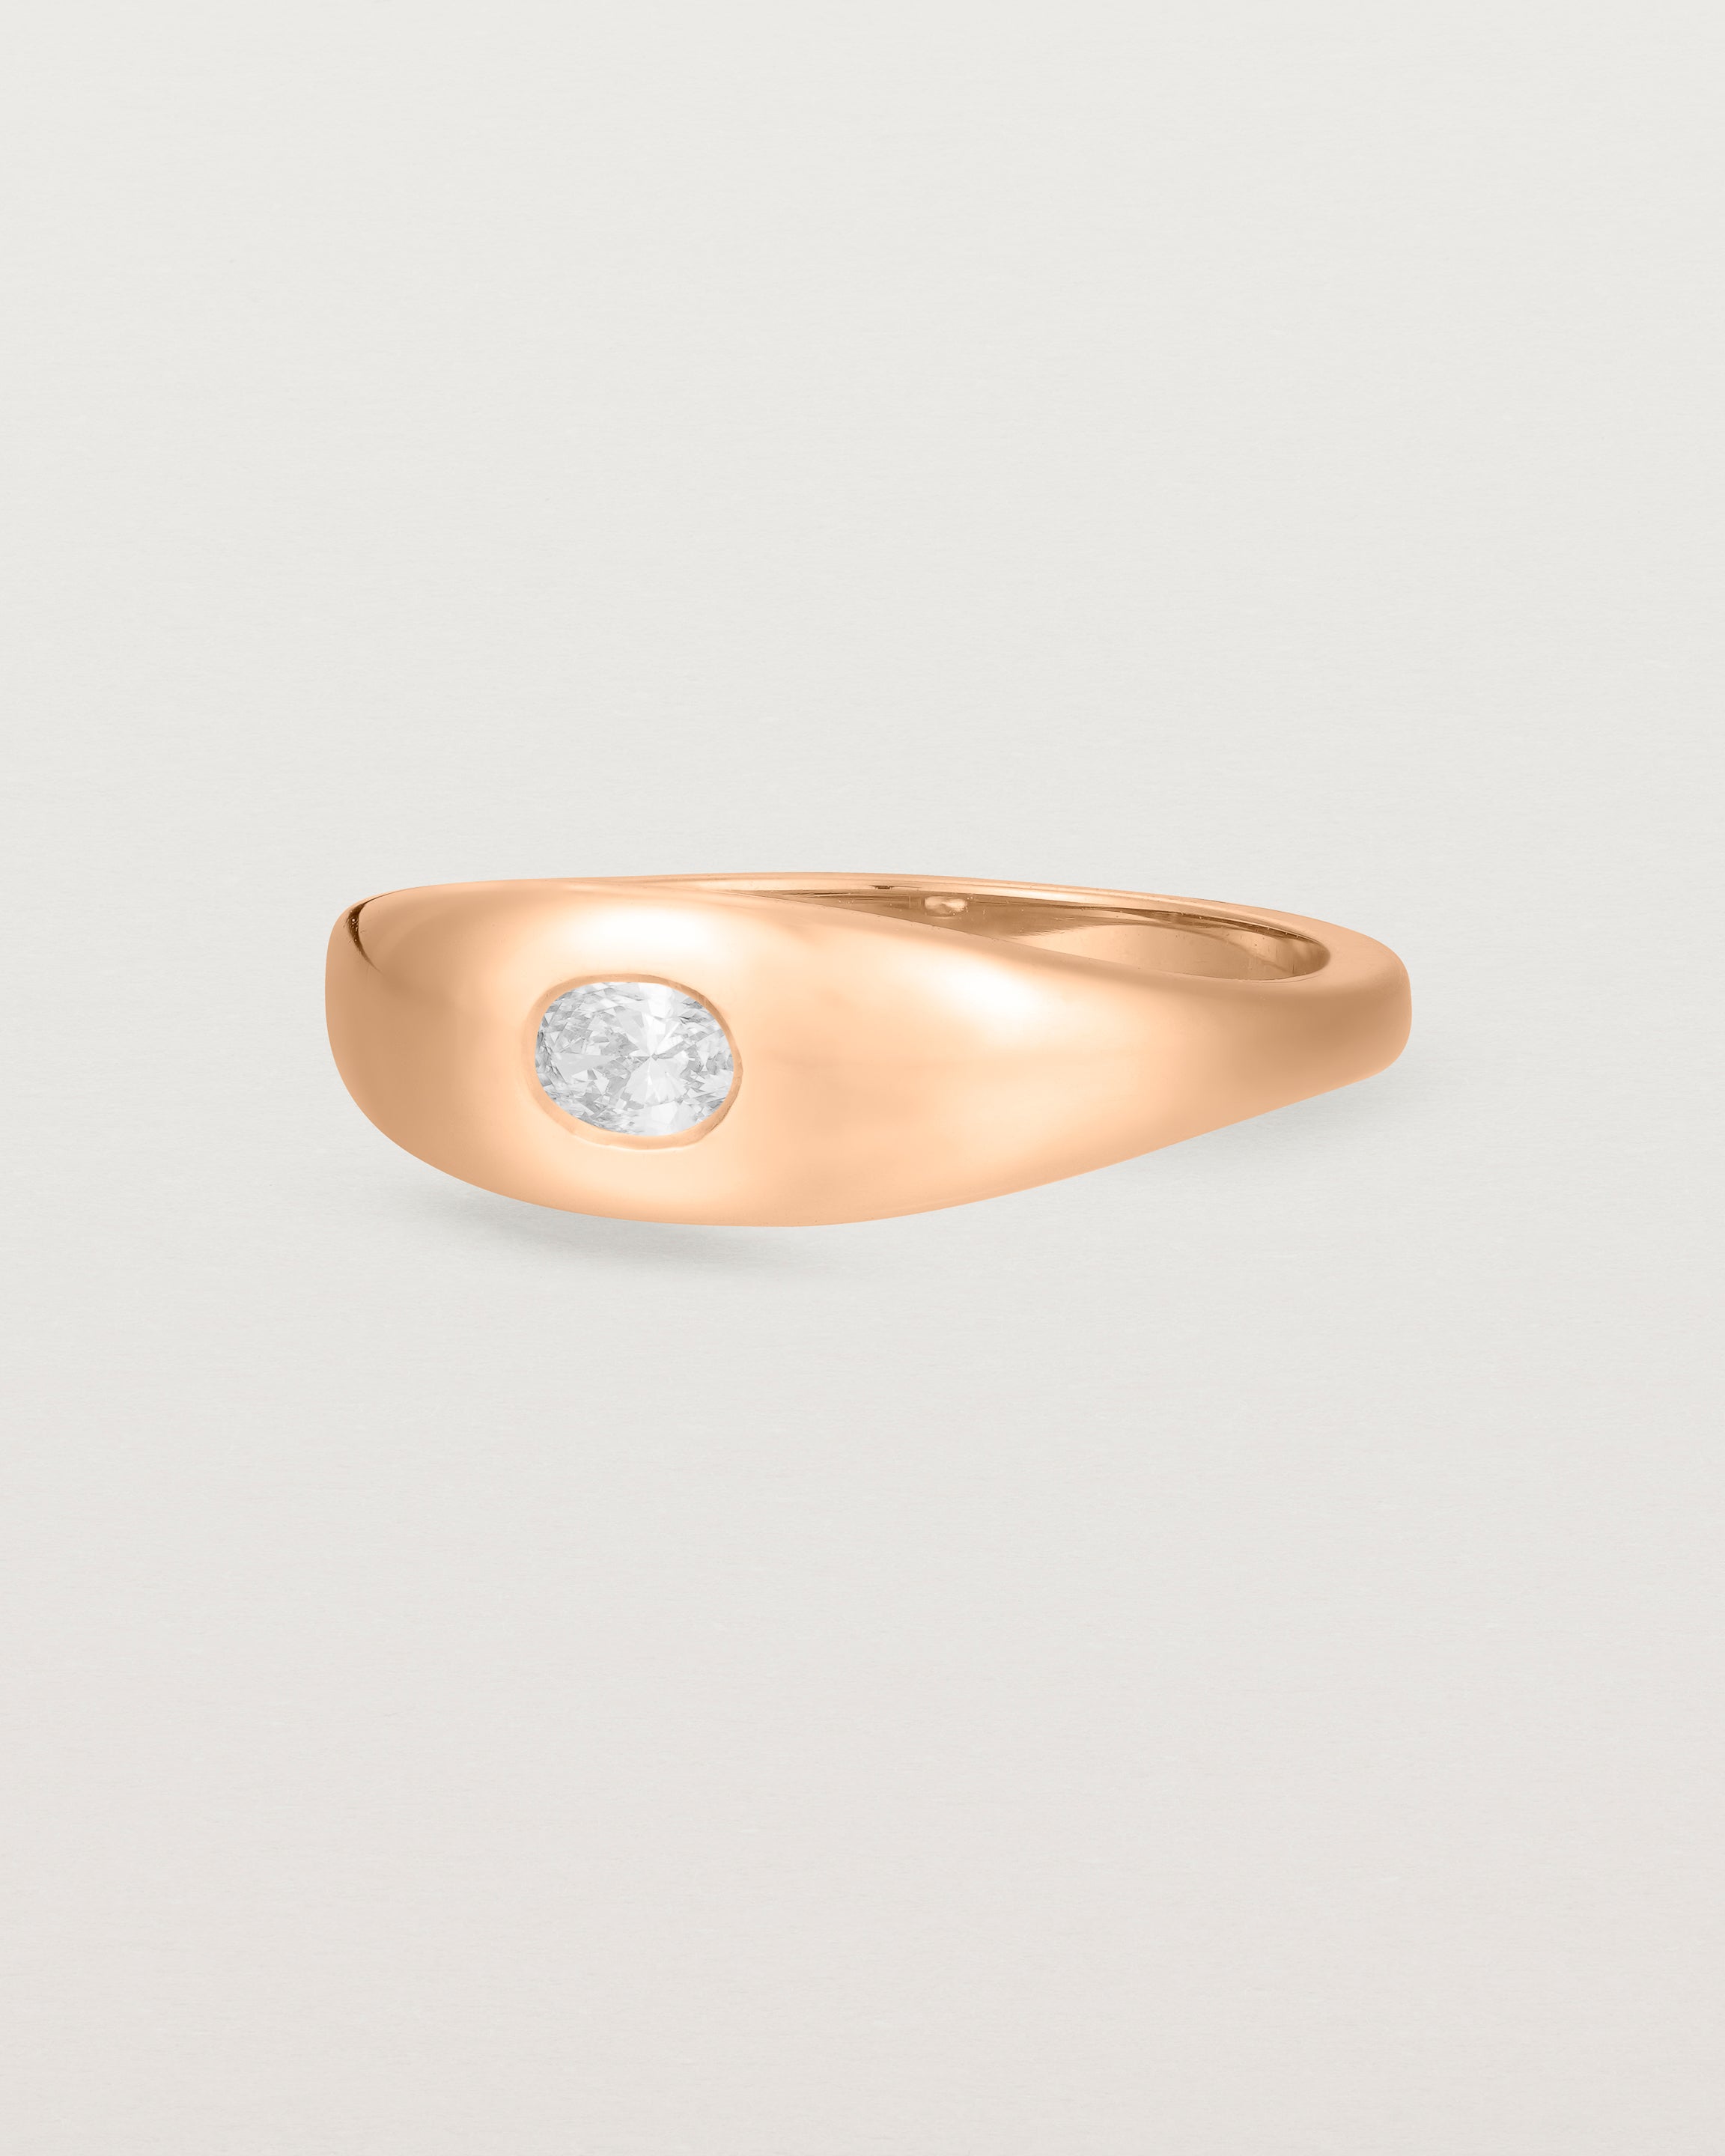 Angled view of the Seule Single Ring | Diamond | Rose Gold.